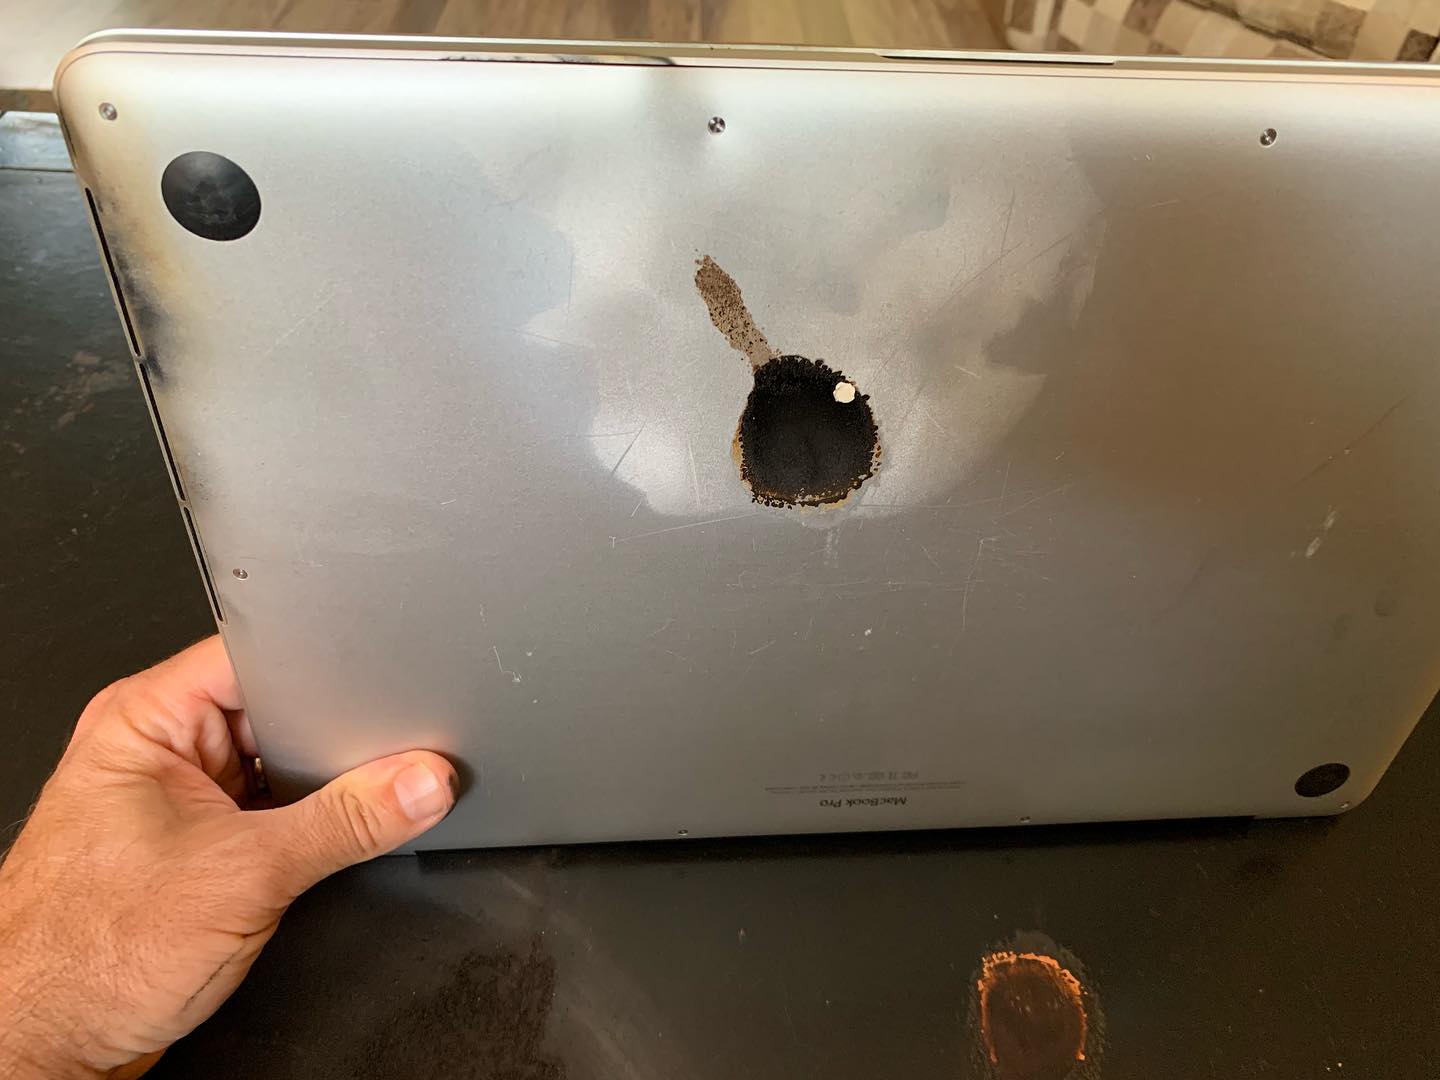 Apple’s MacBook Banned by Airlines Due to Battery Fire Risk